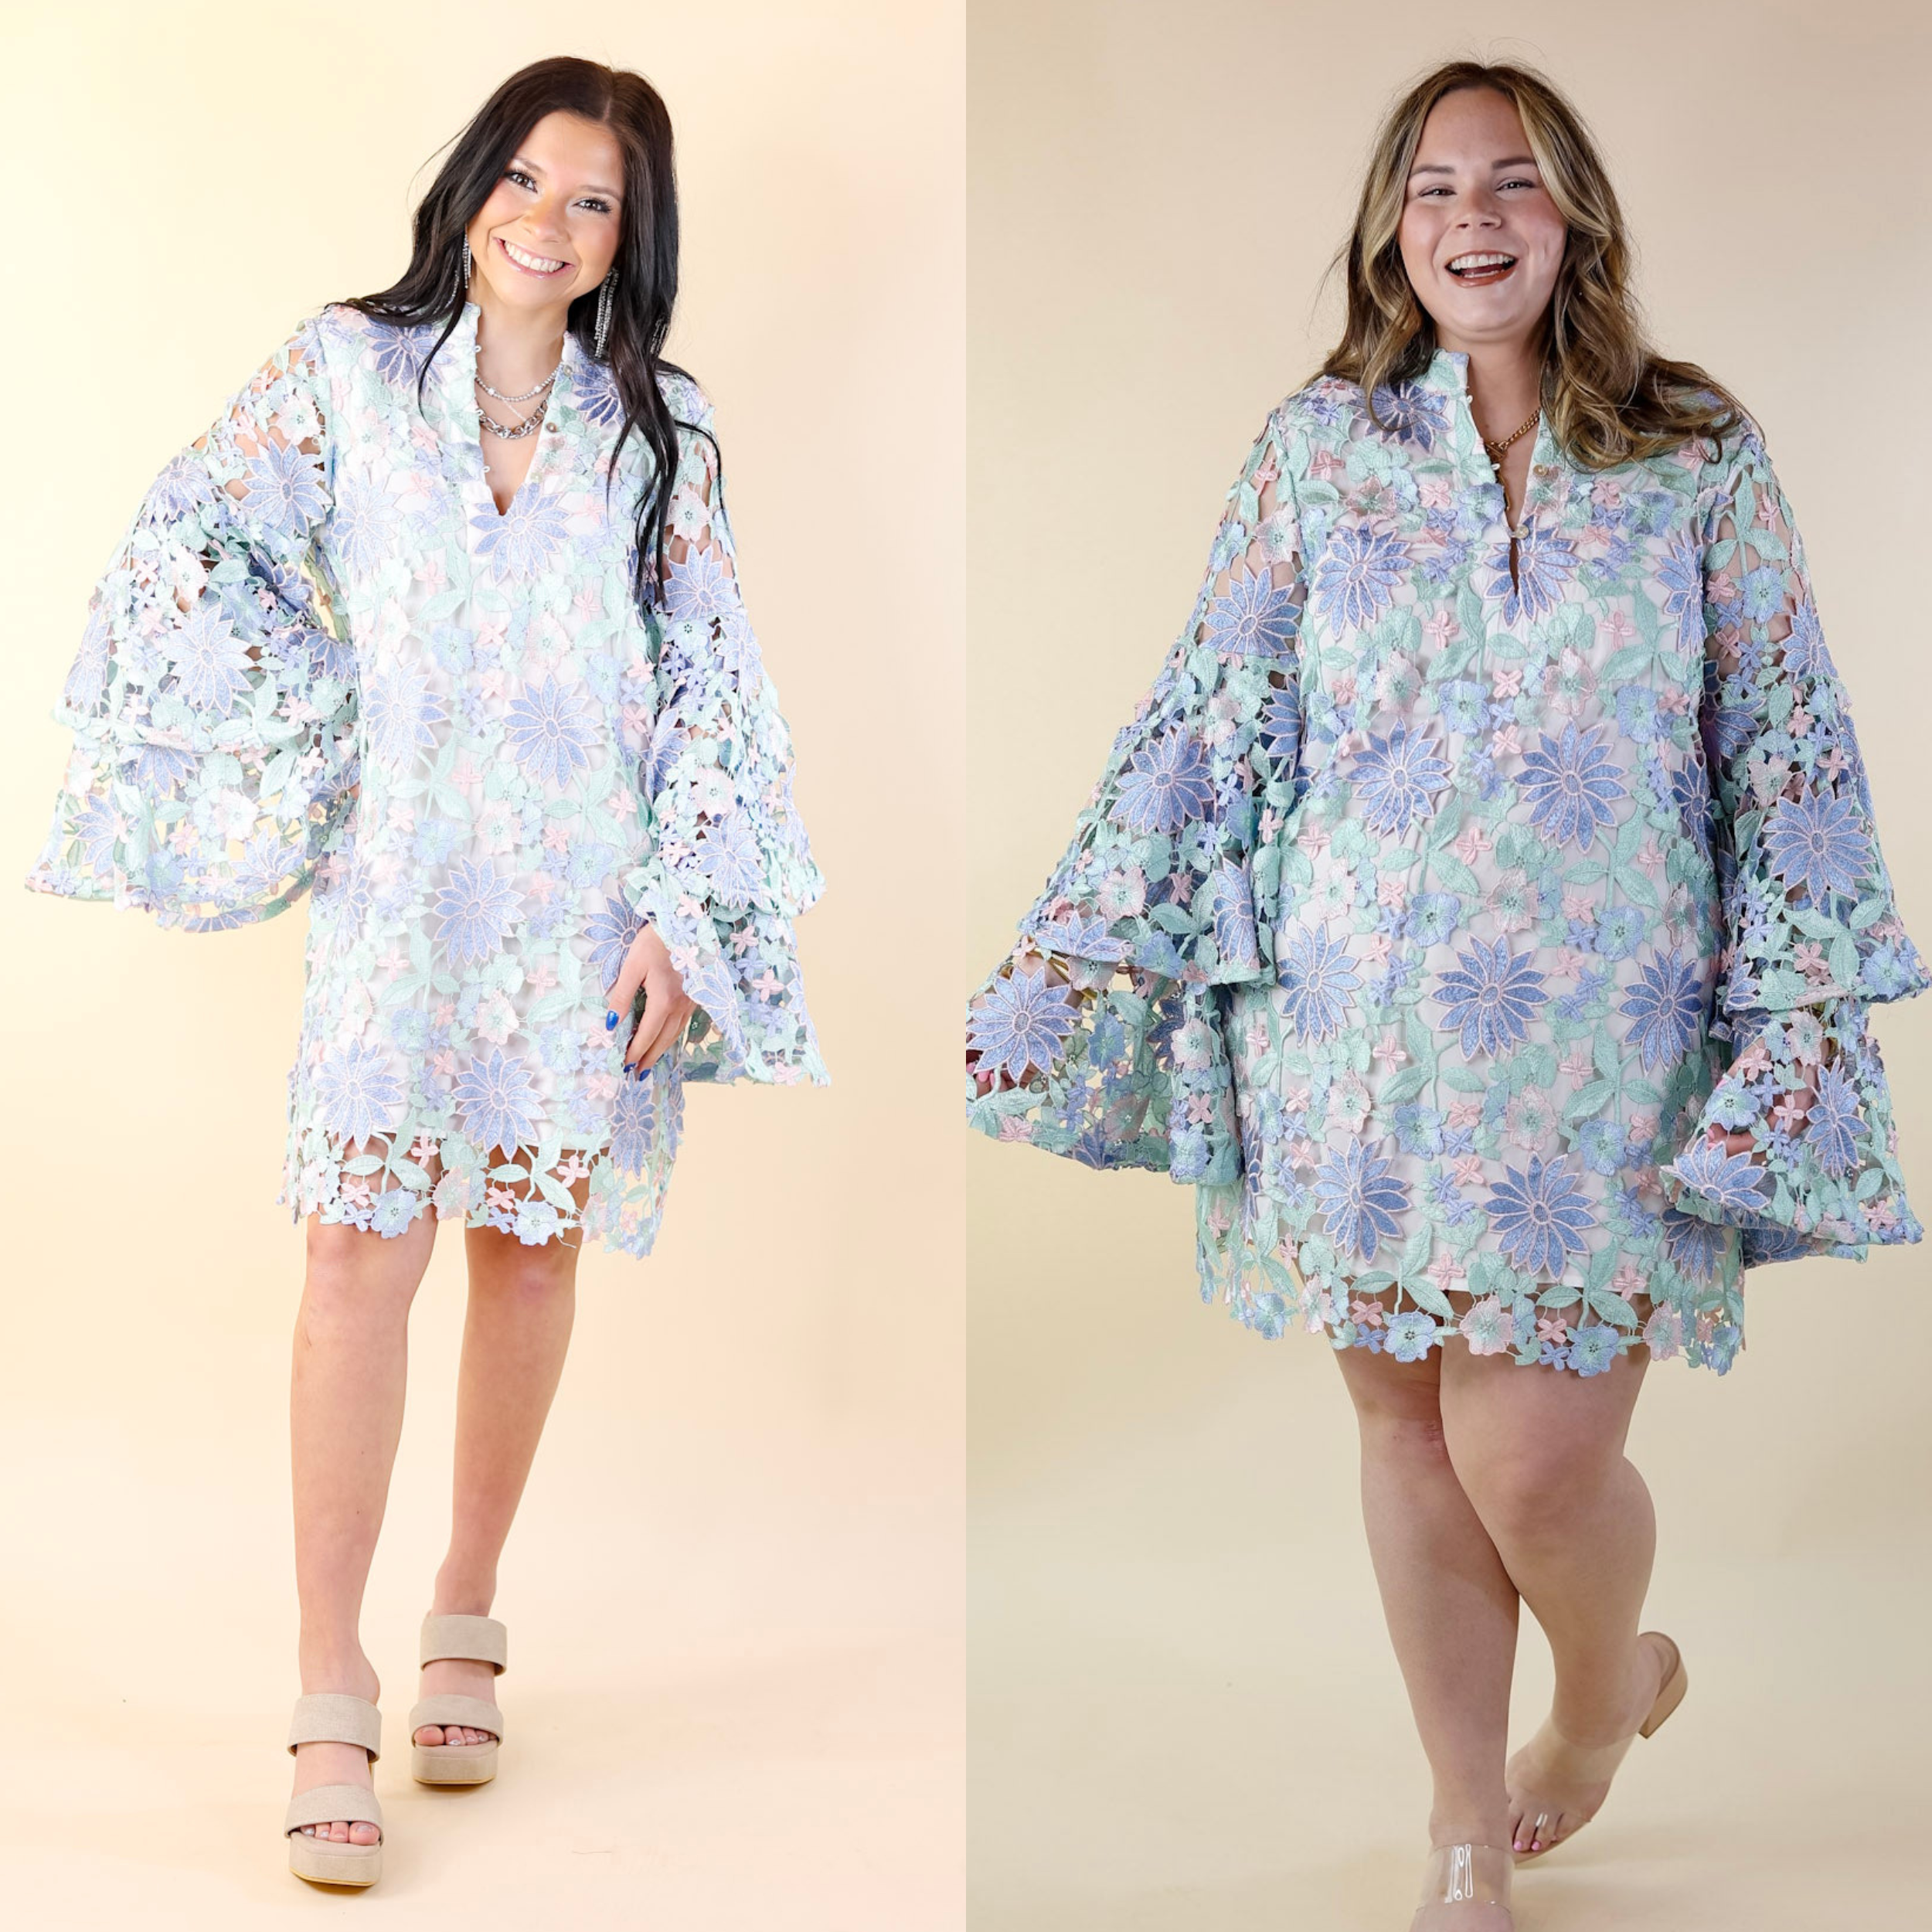 BuddyLove | Gayle Long Sleeve Mini Dress in Bellflower (Blue, Mint Green and Pink) - Giddy Up Glamour Boutique